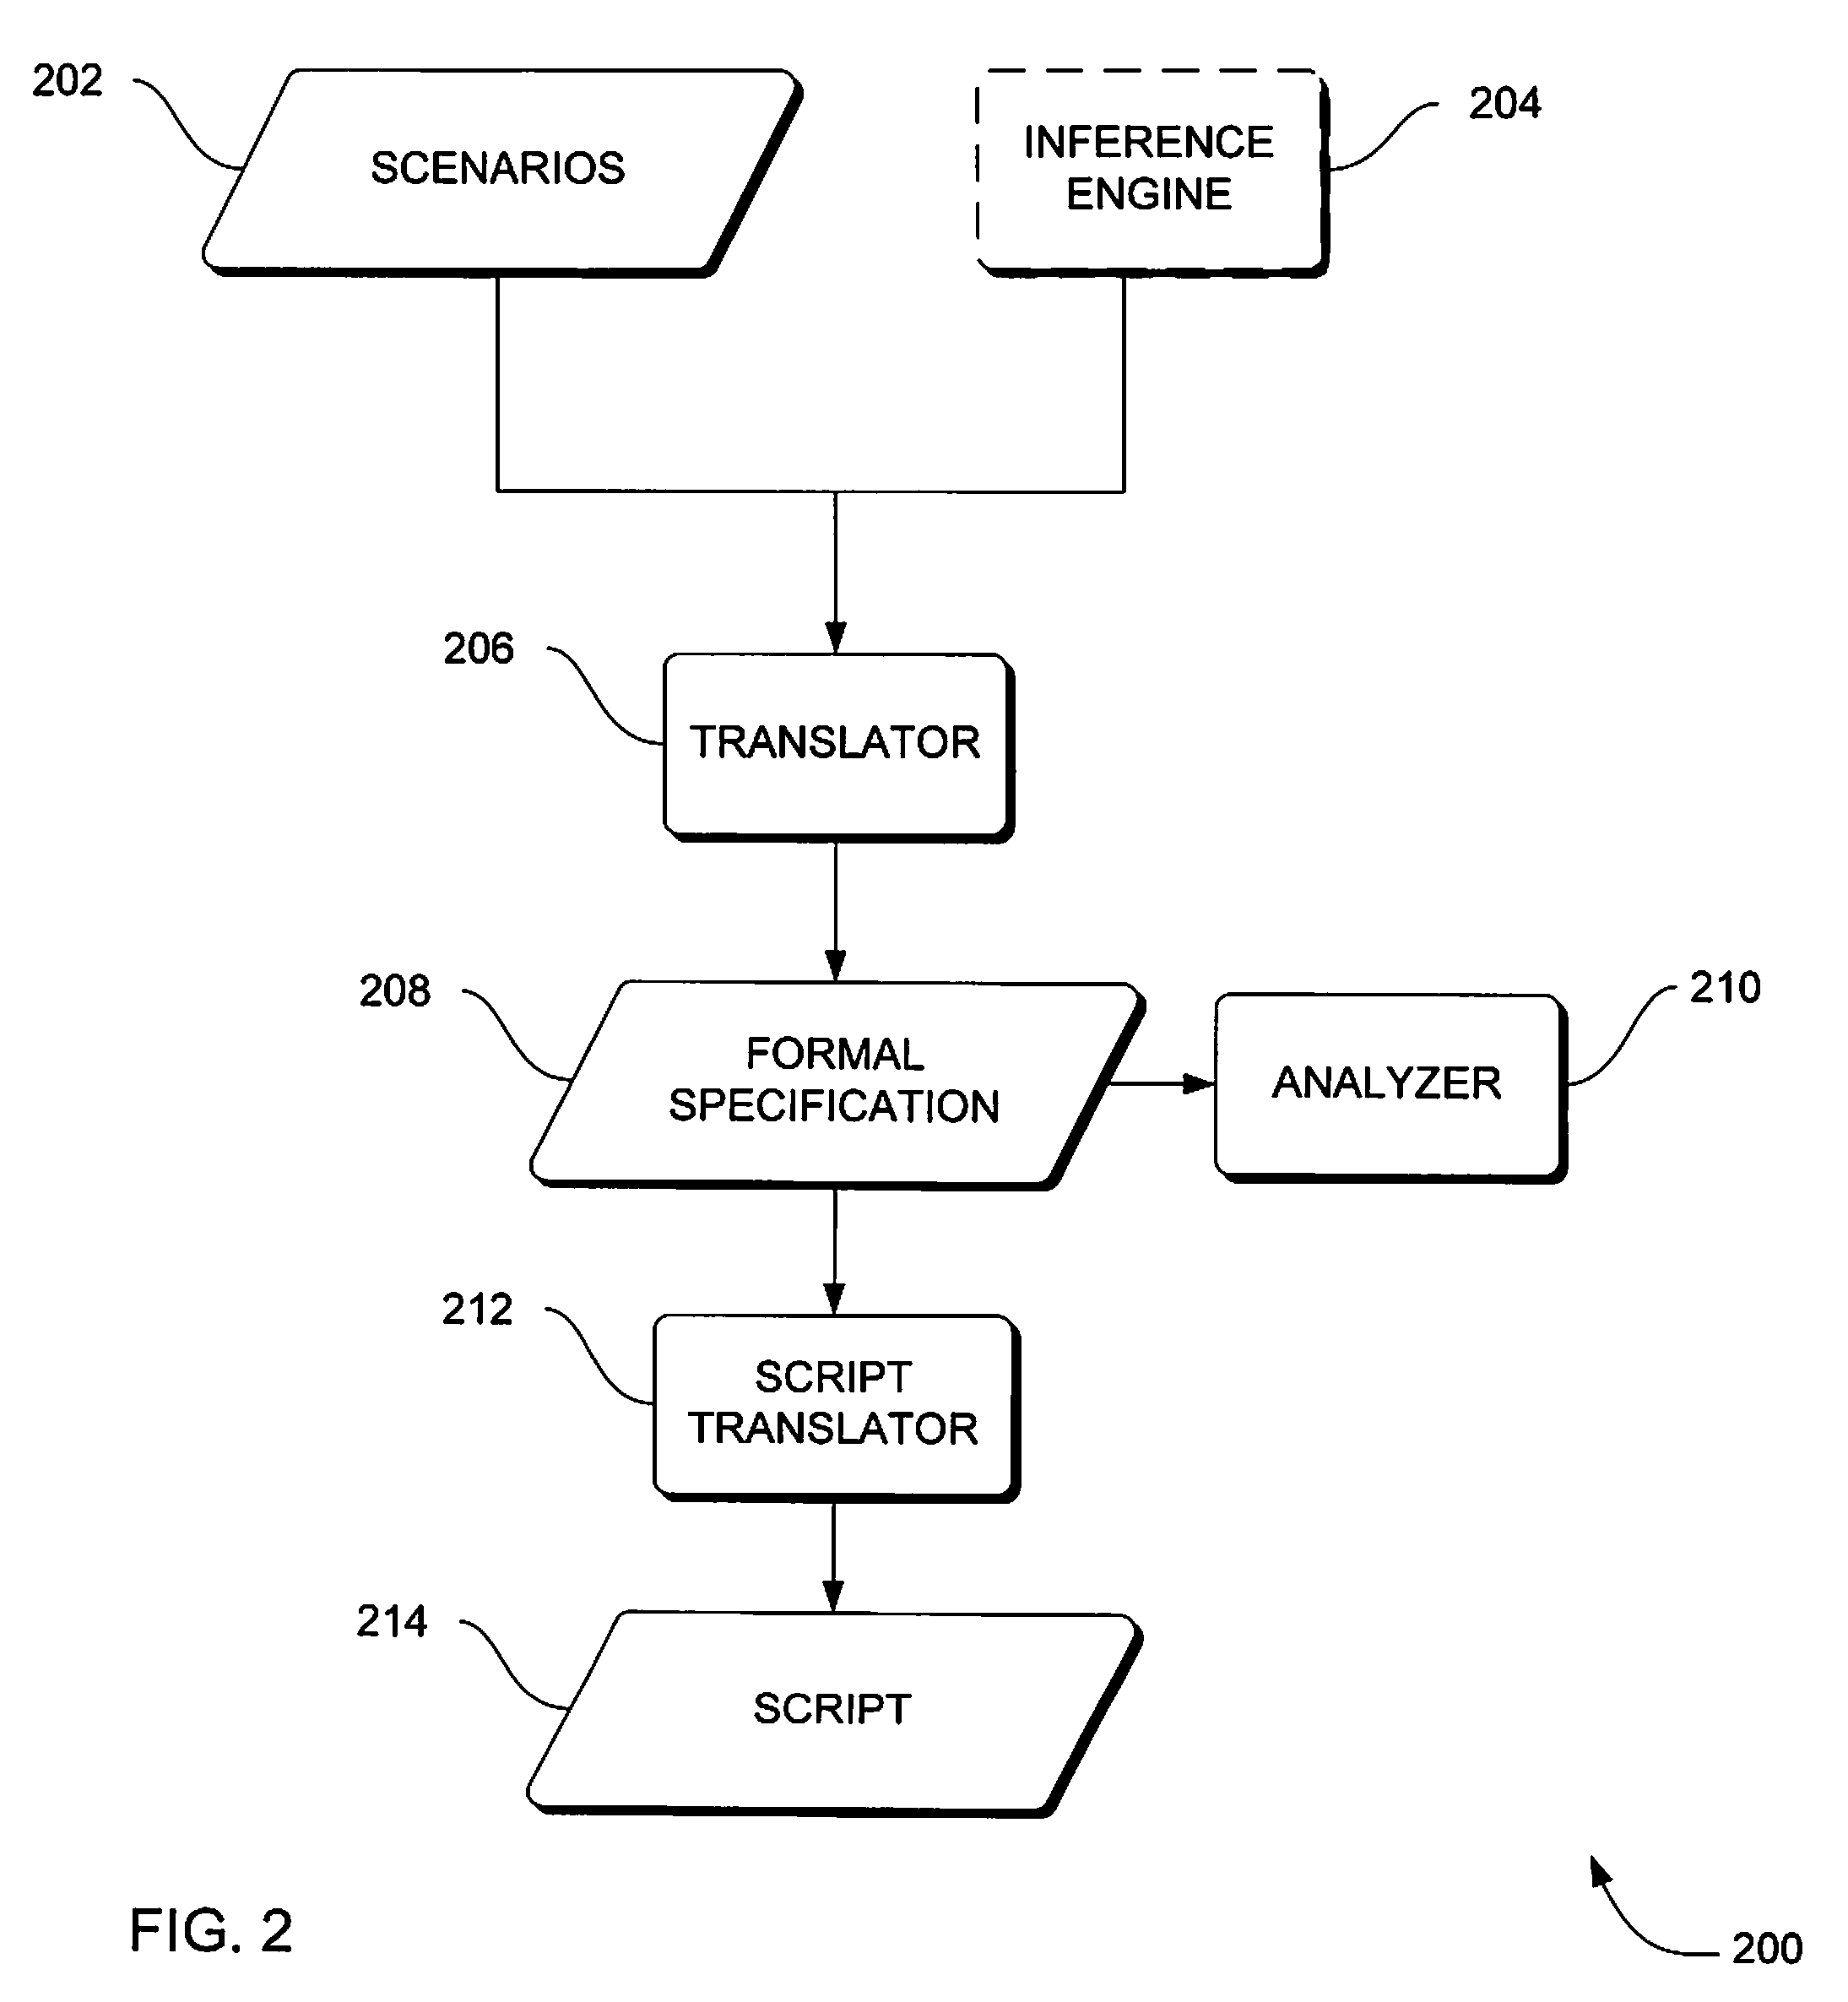 Systems, methods and apparatus for pattern matching in procedure development and verification